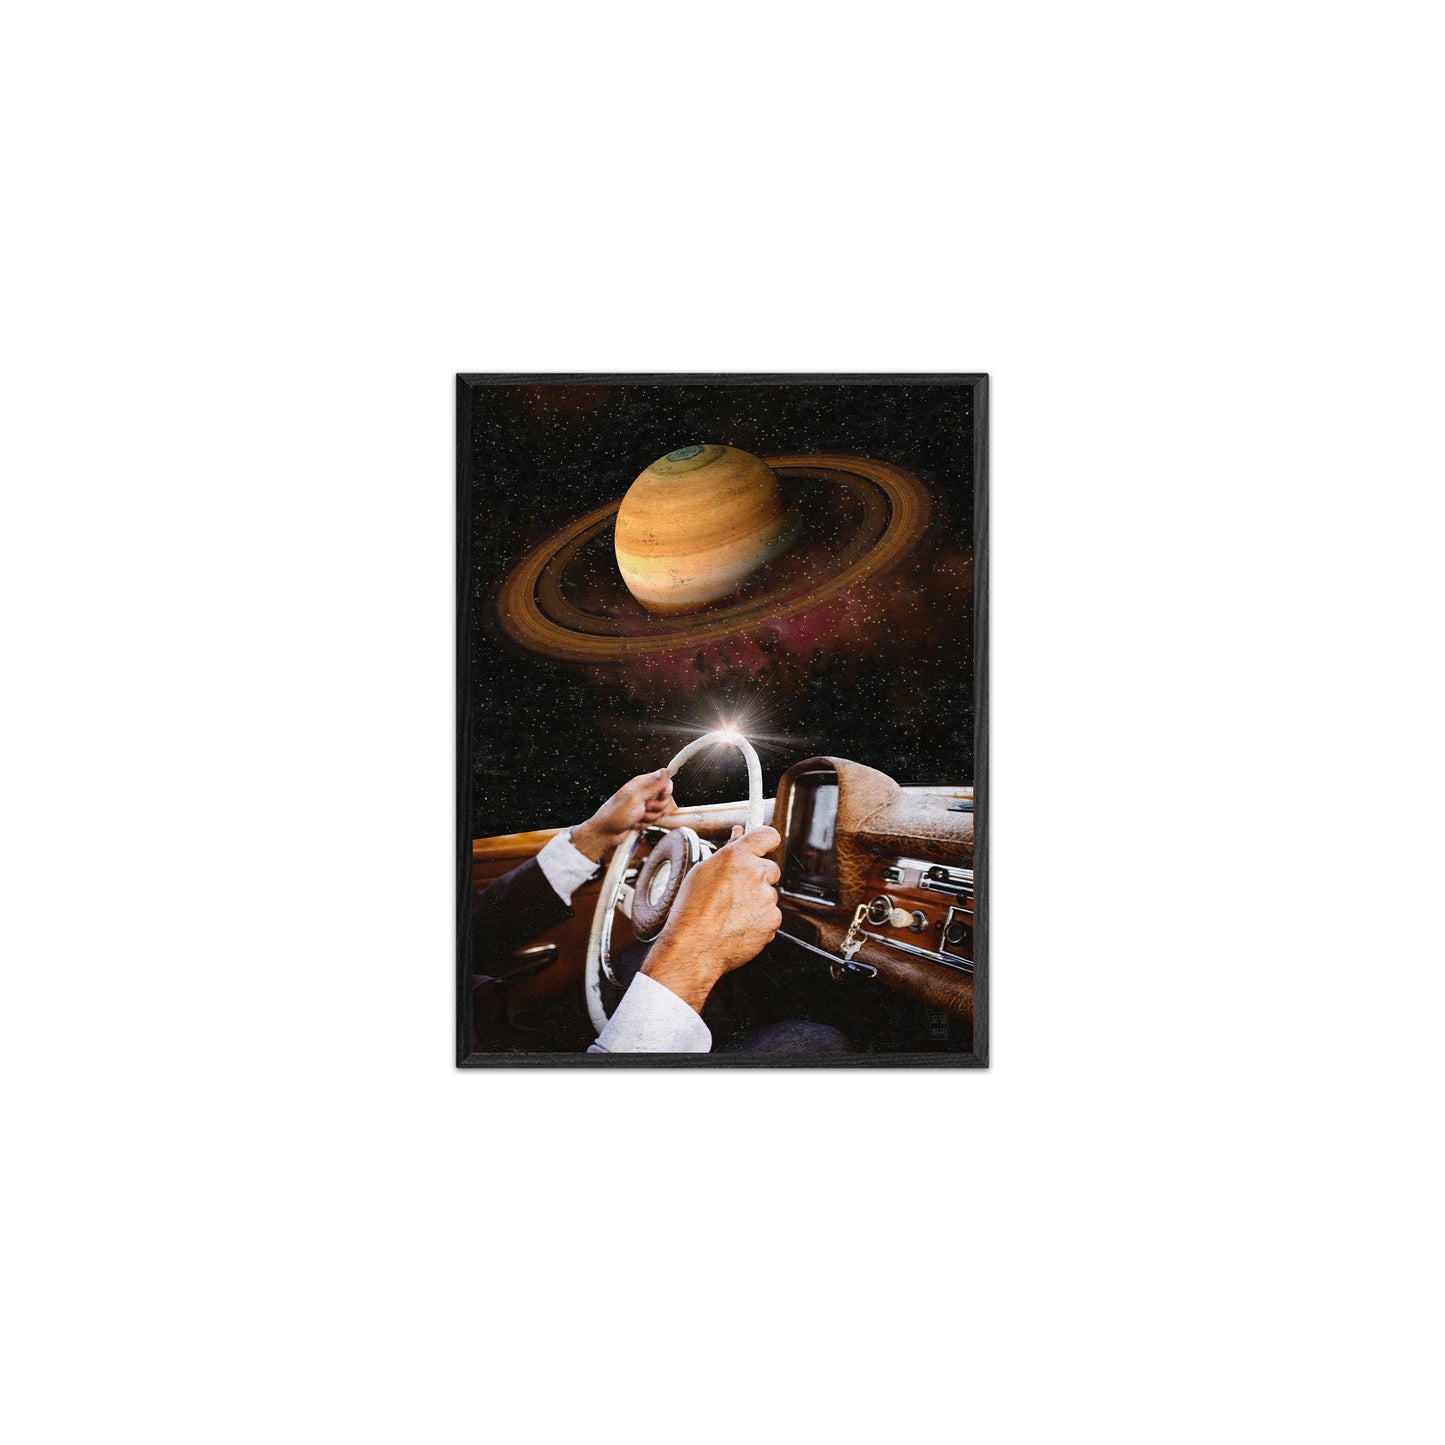 Saturn Cruise 8.5 X 11 Inch Print for Sci-Fi & Surreal Art Fans, great gift for home decor and room design